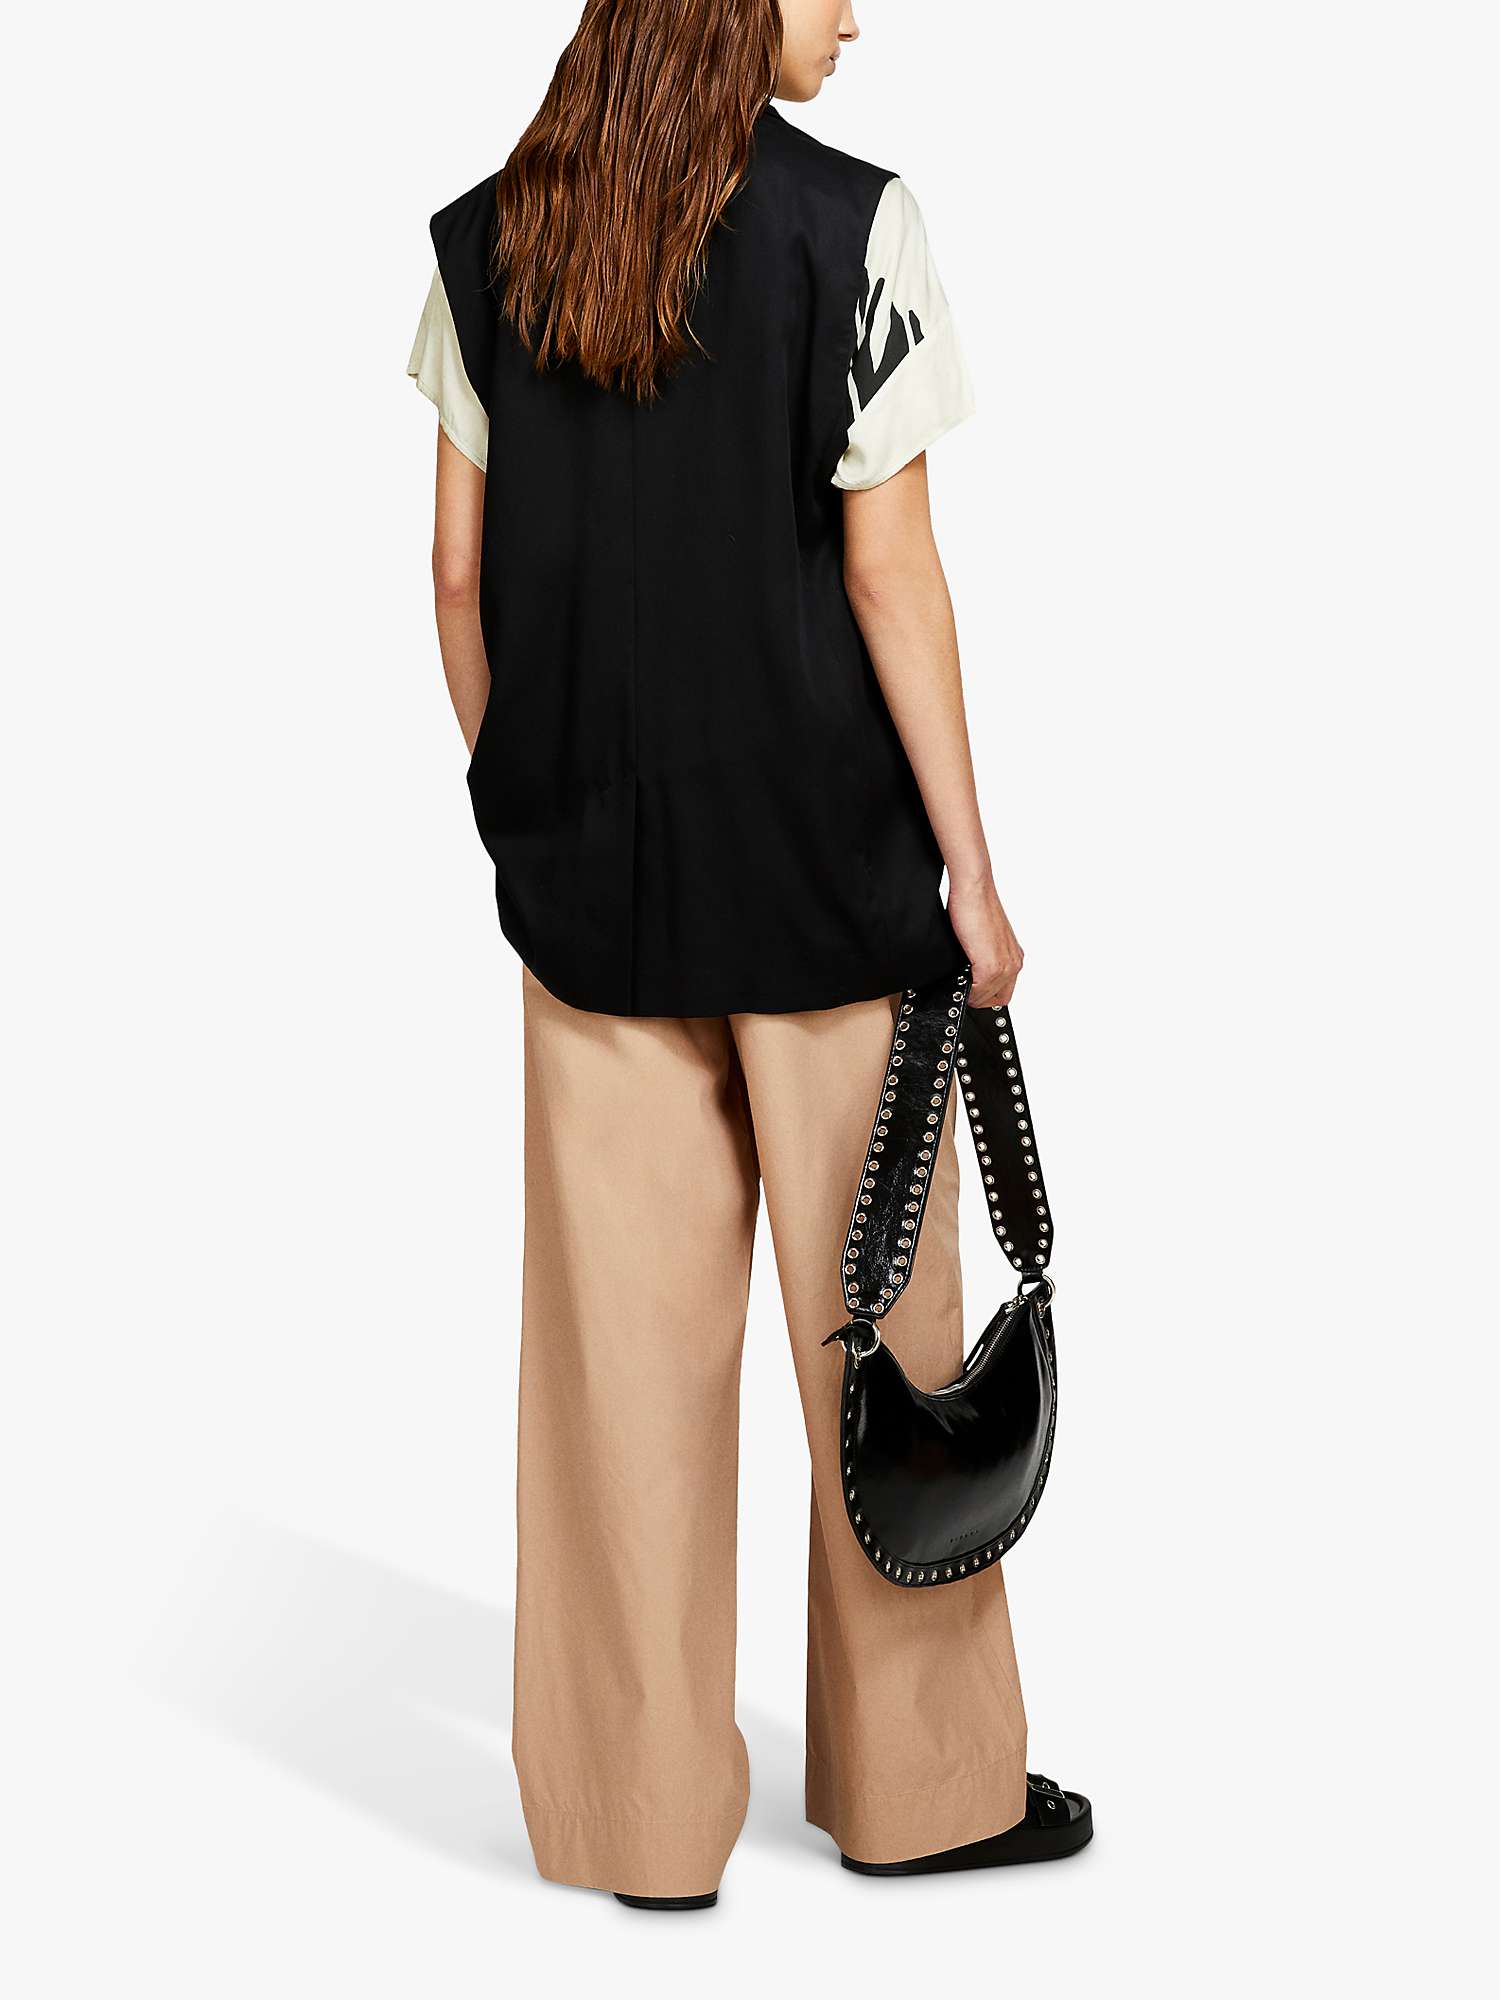 Buy SISLEY Cotton Poplin Flared Trousers Online at johnlewis.com